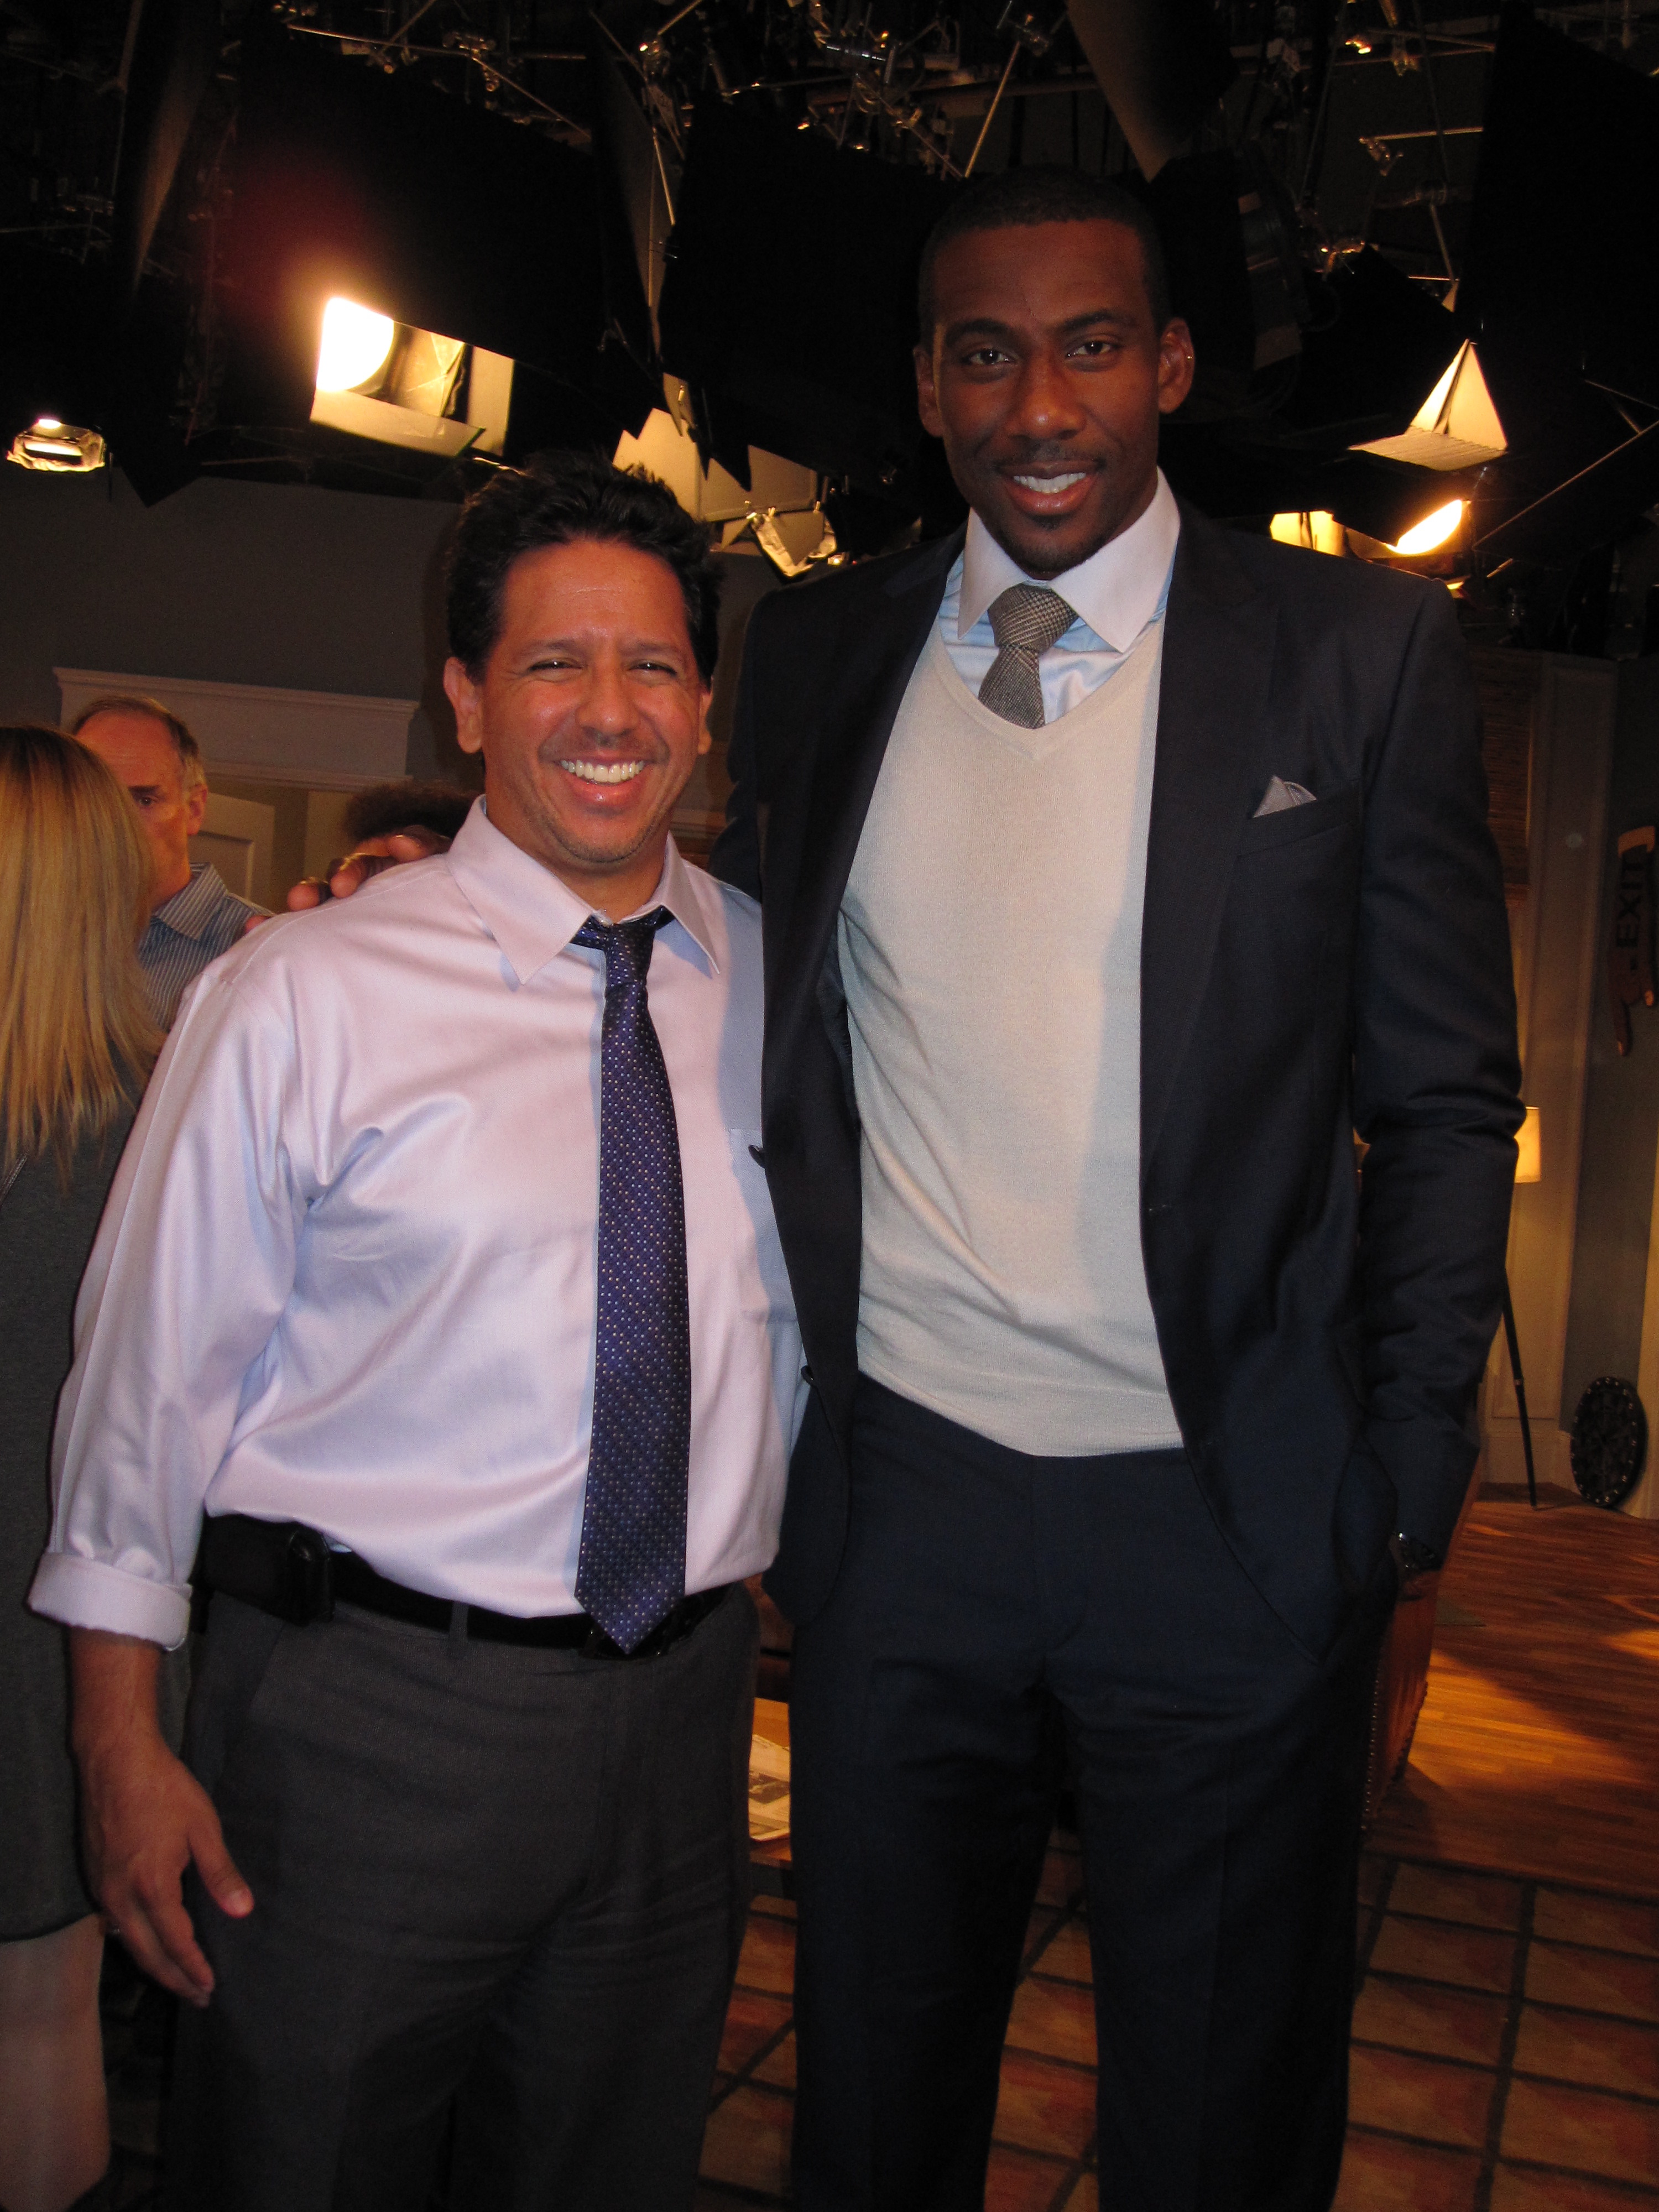 Hanging with Amare Stoudemire